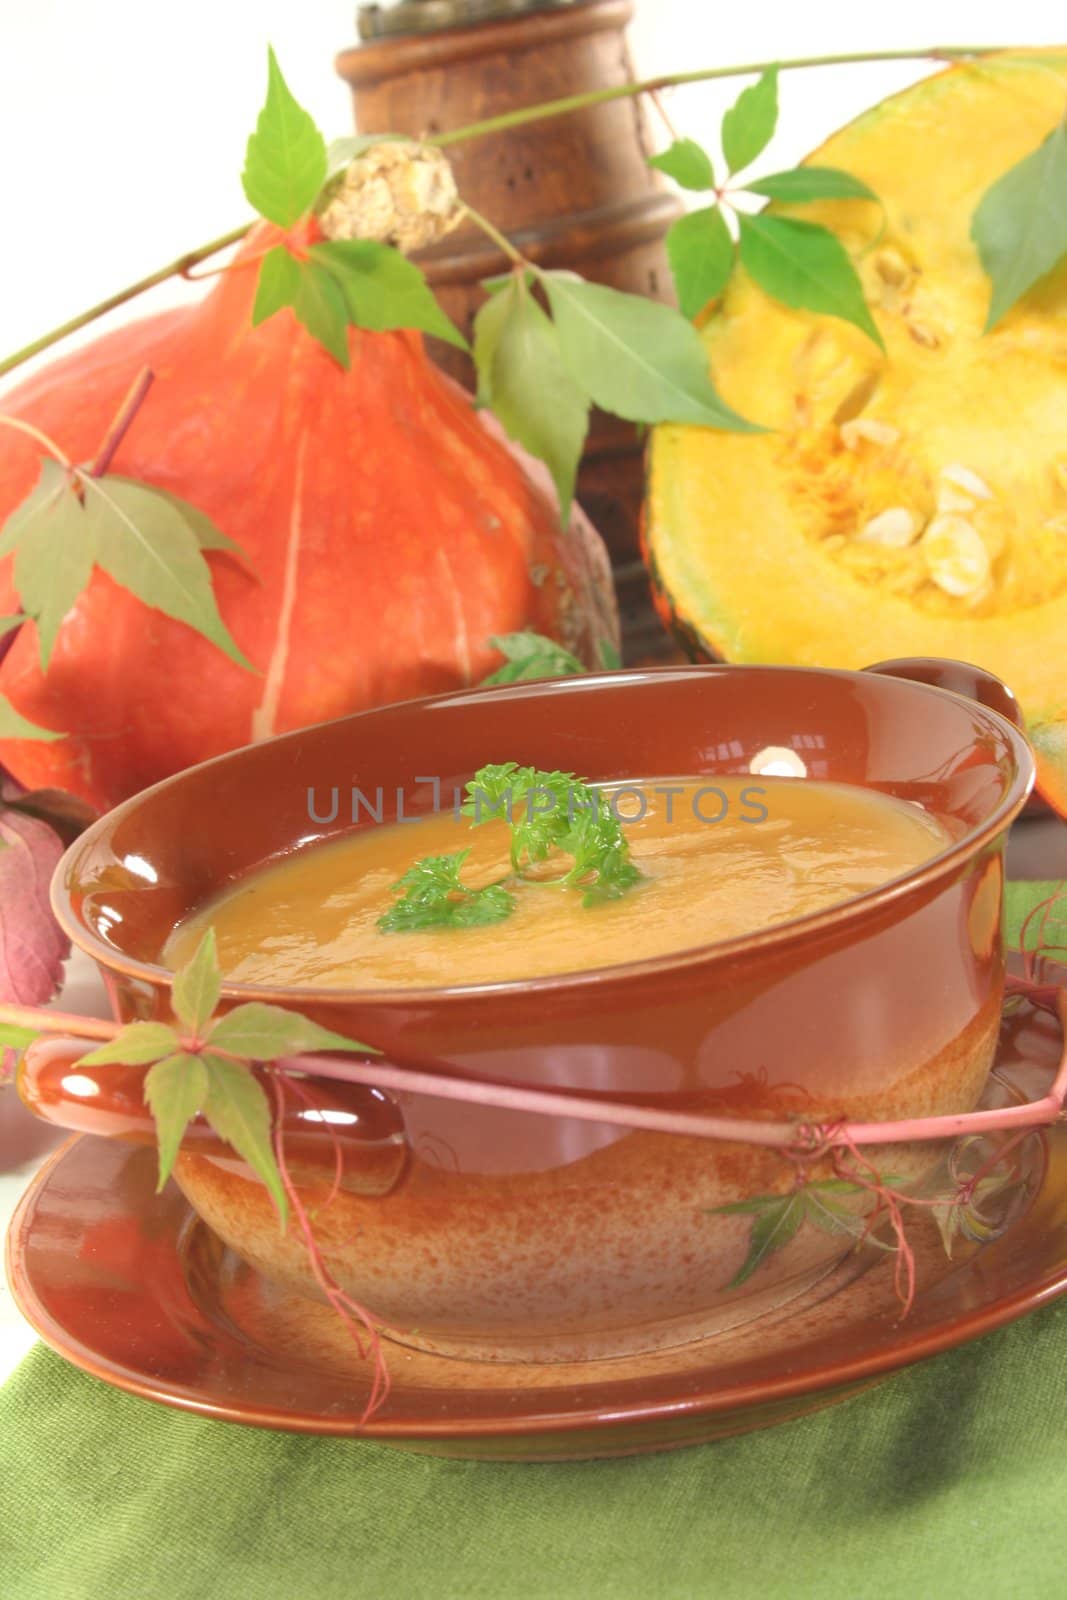 Pumpkin soup by discovery